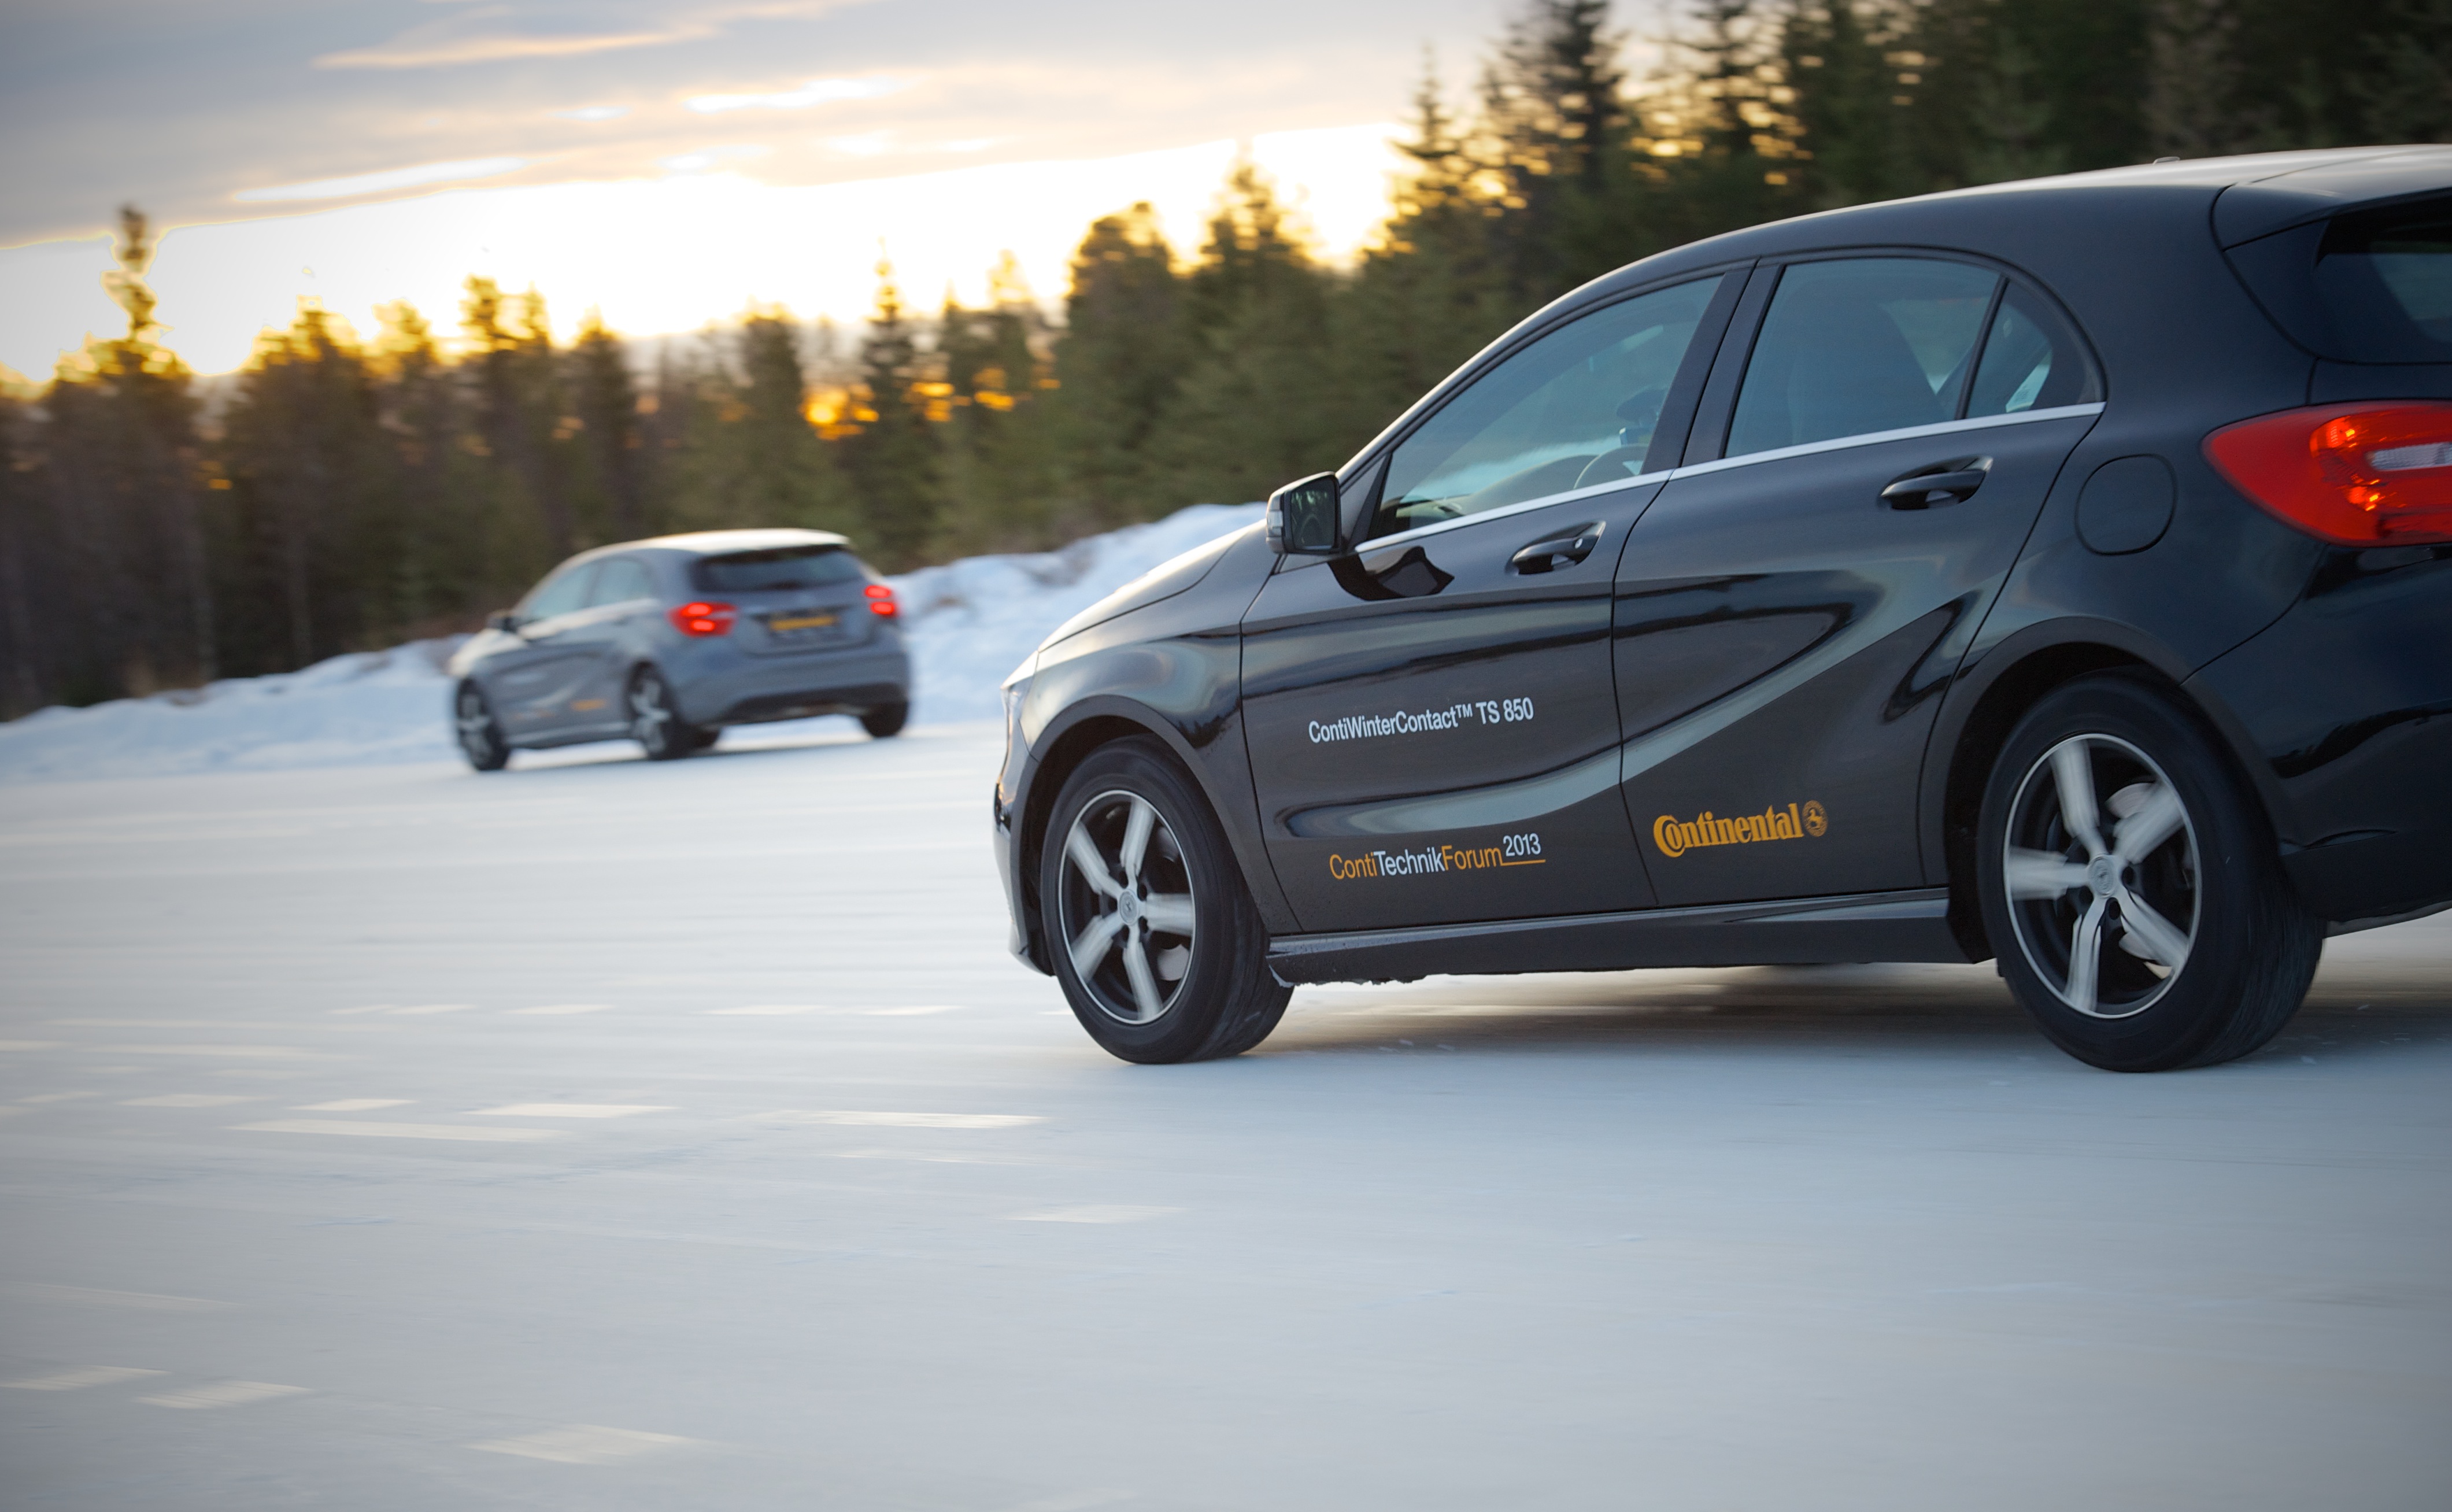 Conti launched the new winter tyres from its Arvidsjaur, Sweden facility